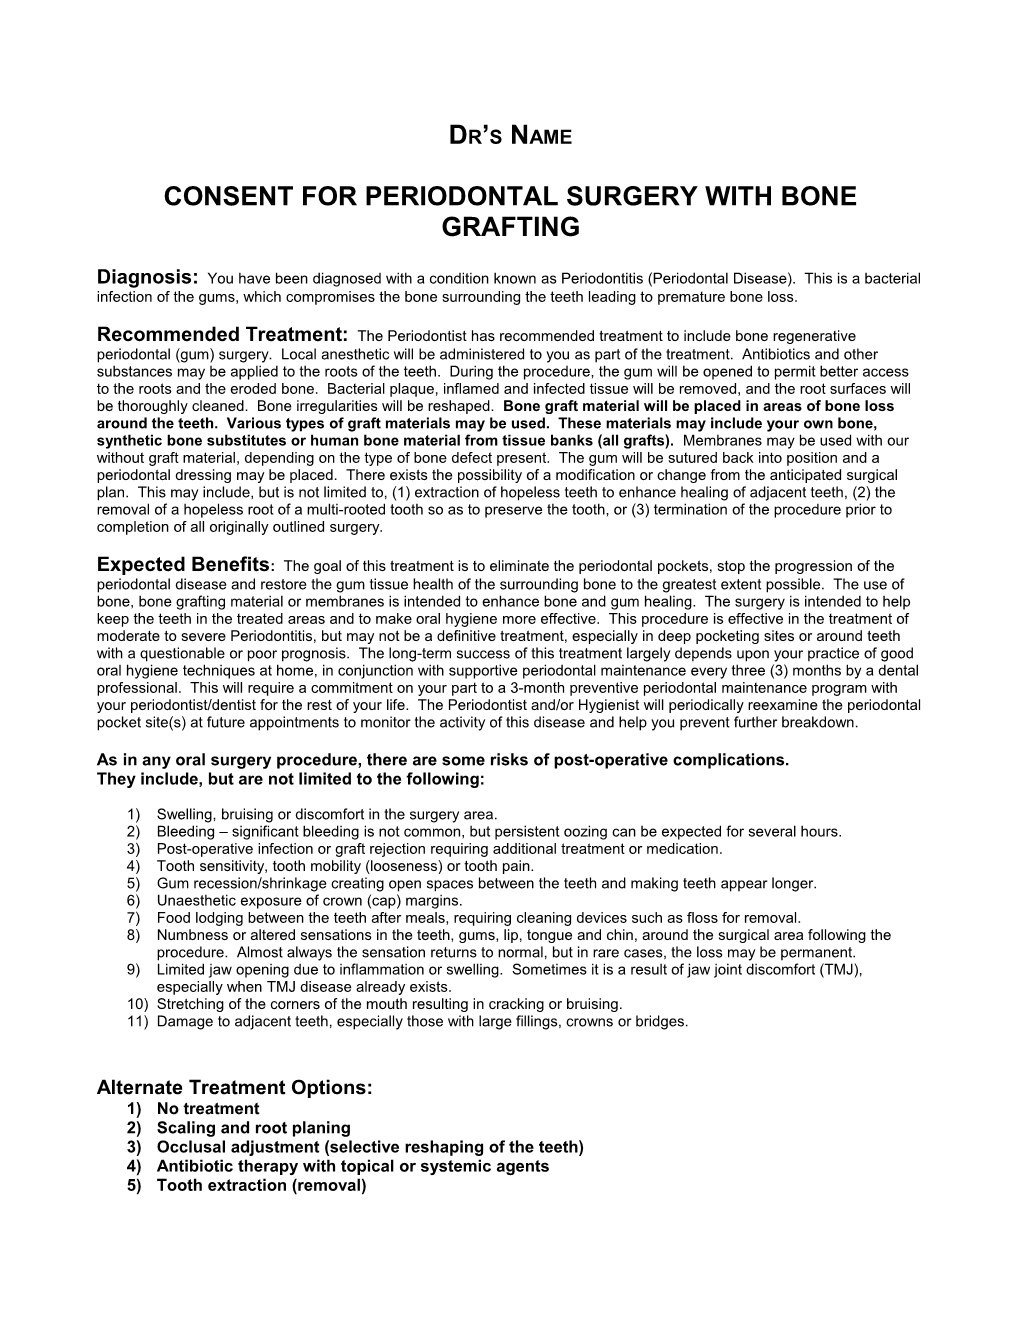 Consent for Periodontal Surgery with Bone Grafting